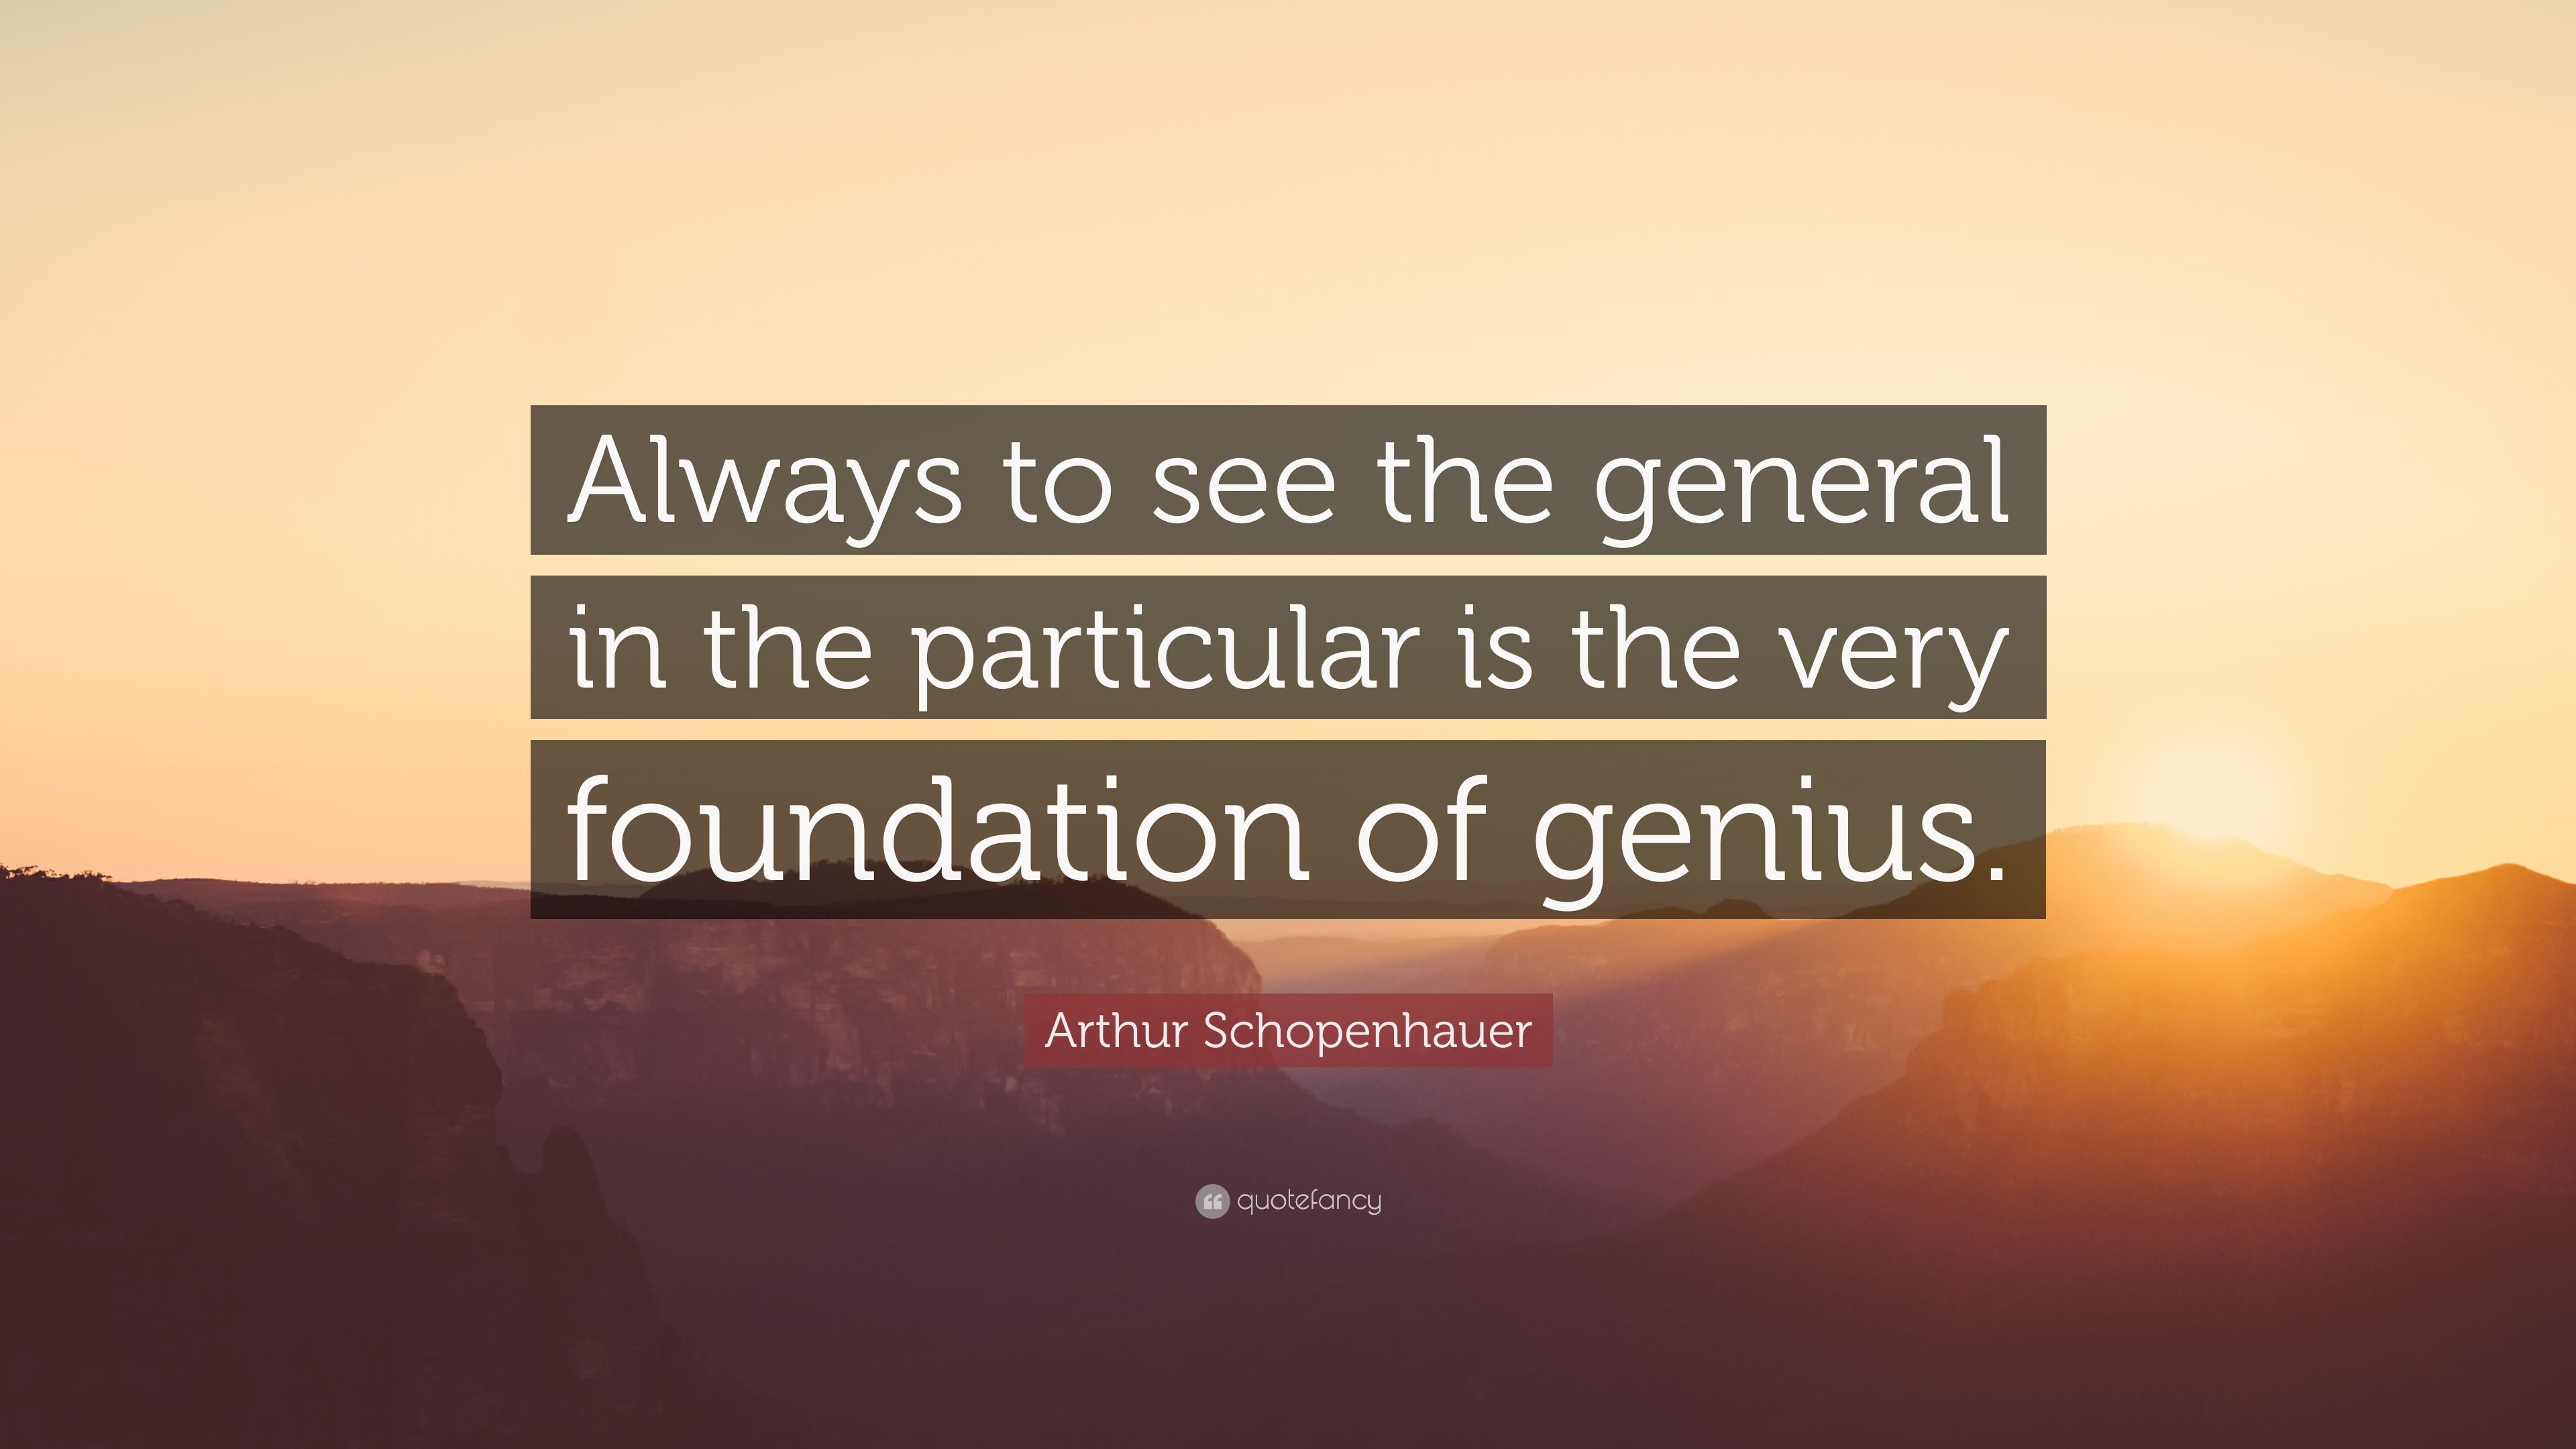 Arthur Schopenhauer Quote: “Always to see the general in the particular is the very foundation of